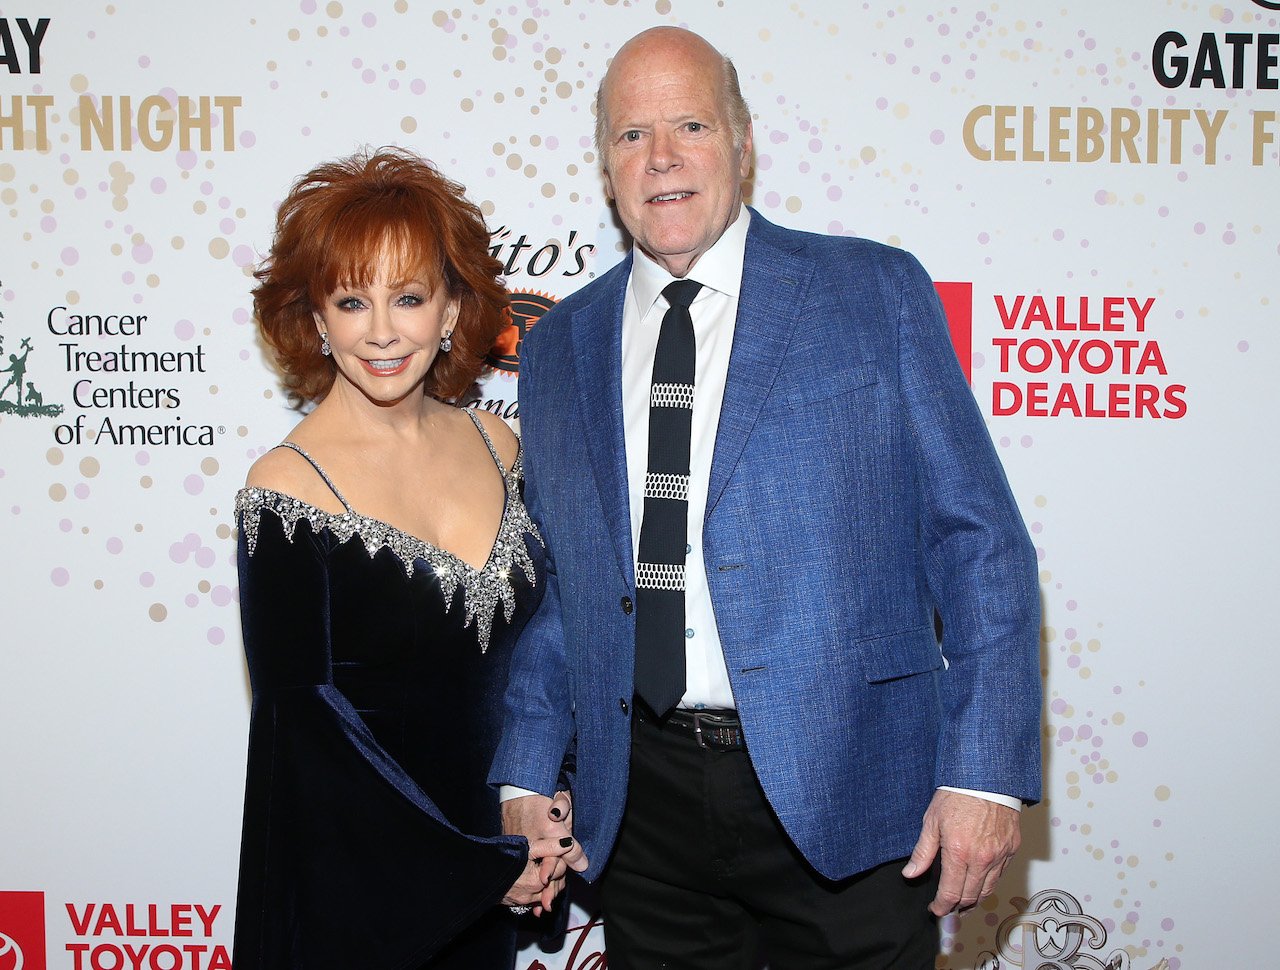 Reba McEntire and Rex Linn hold hands and pose for photos